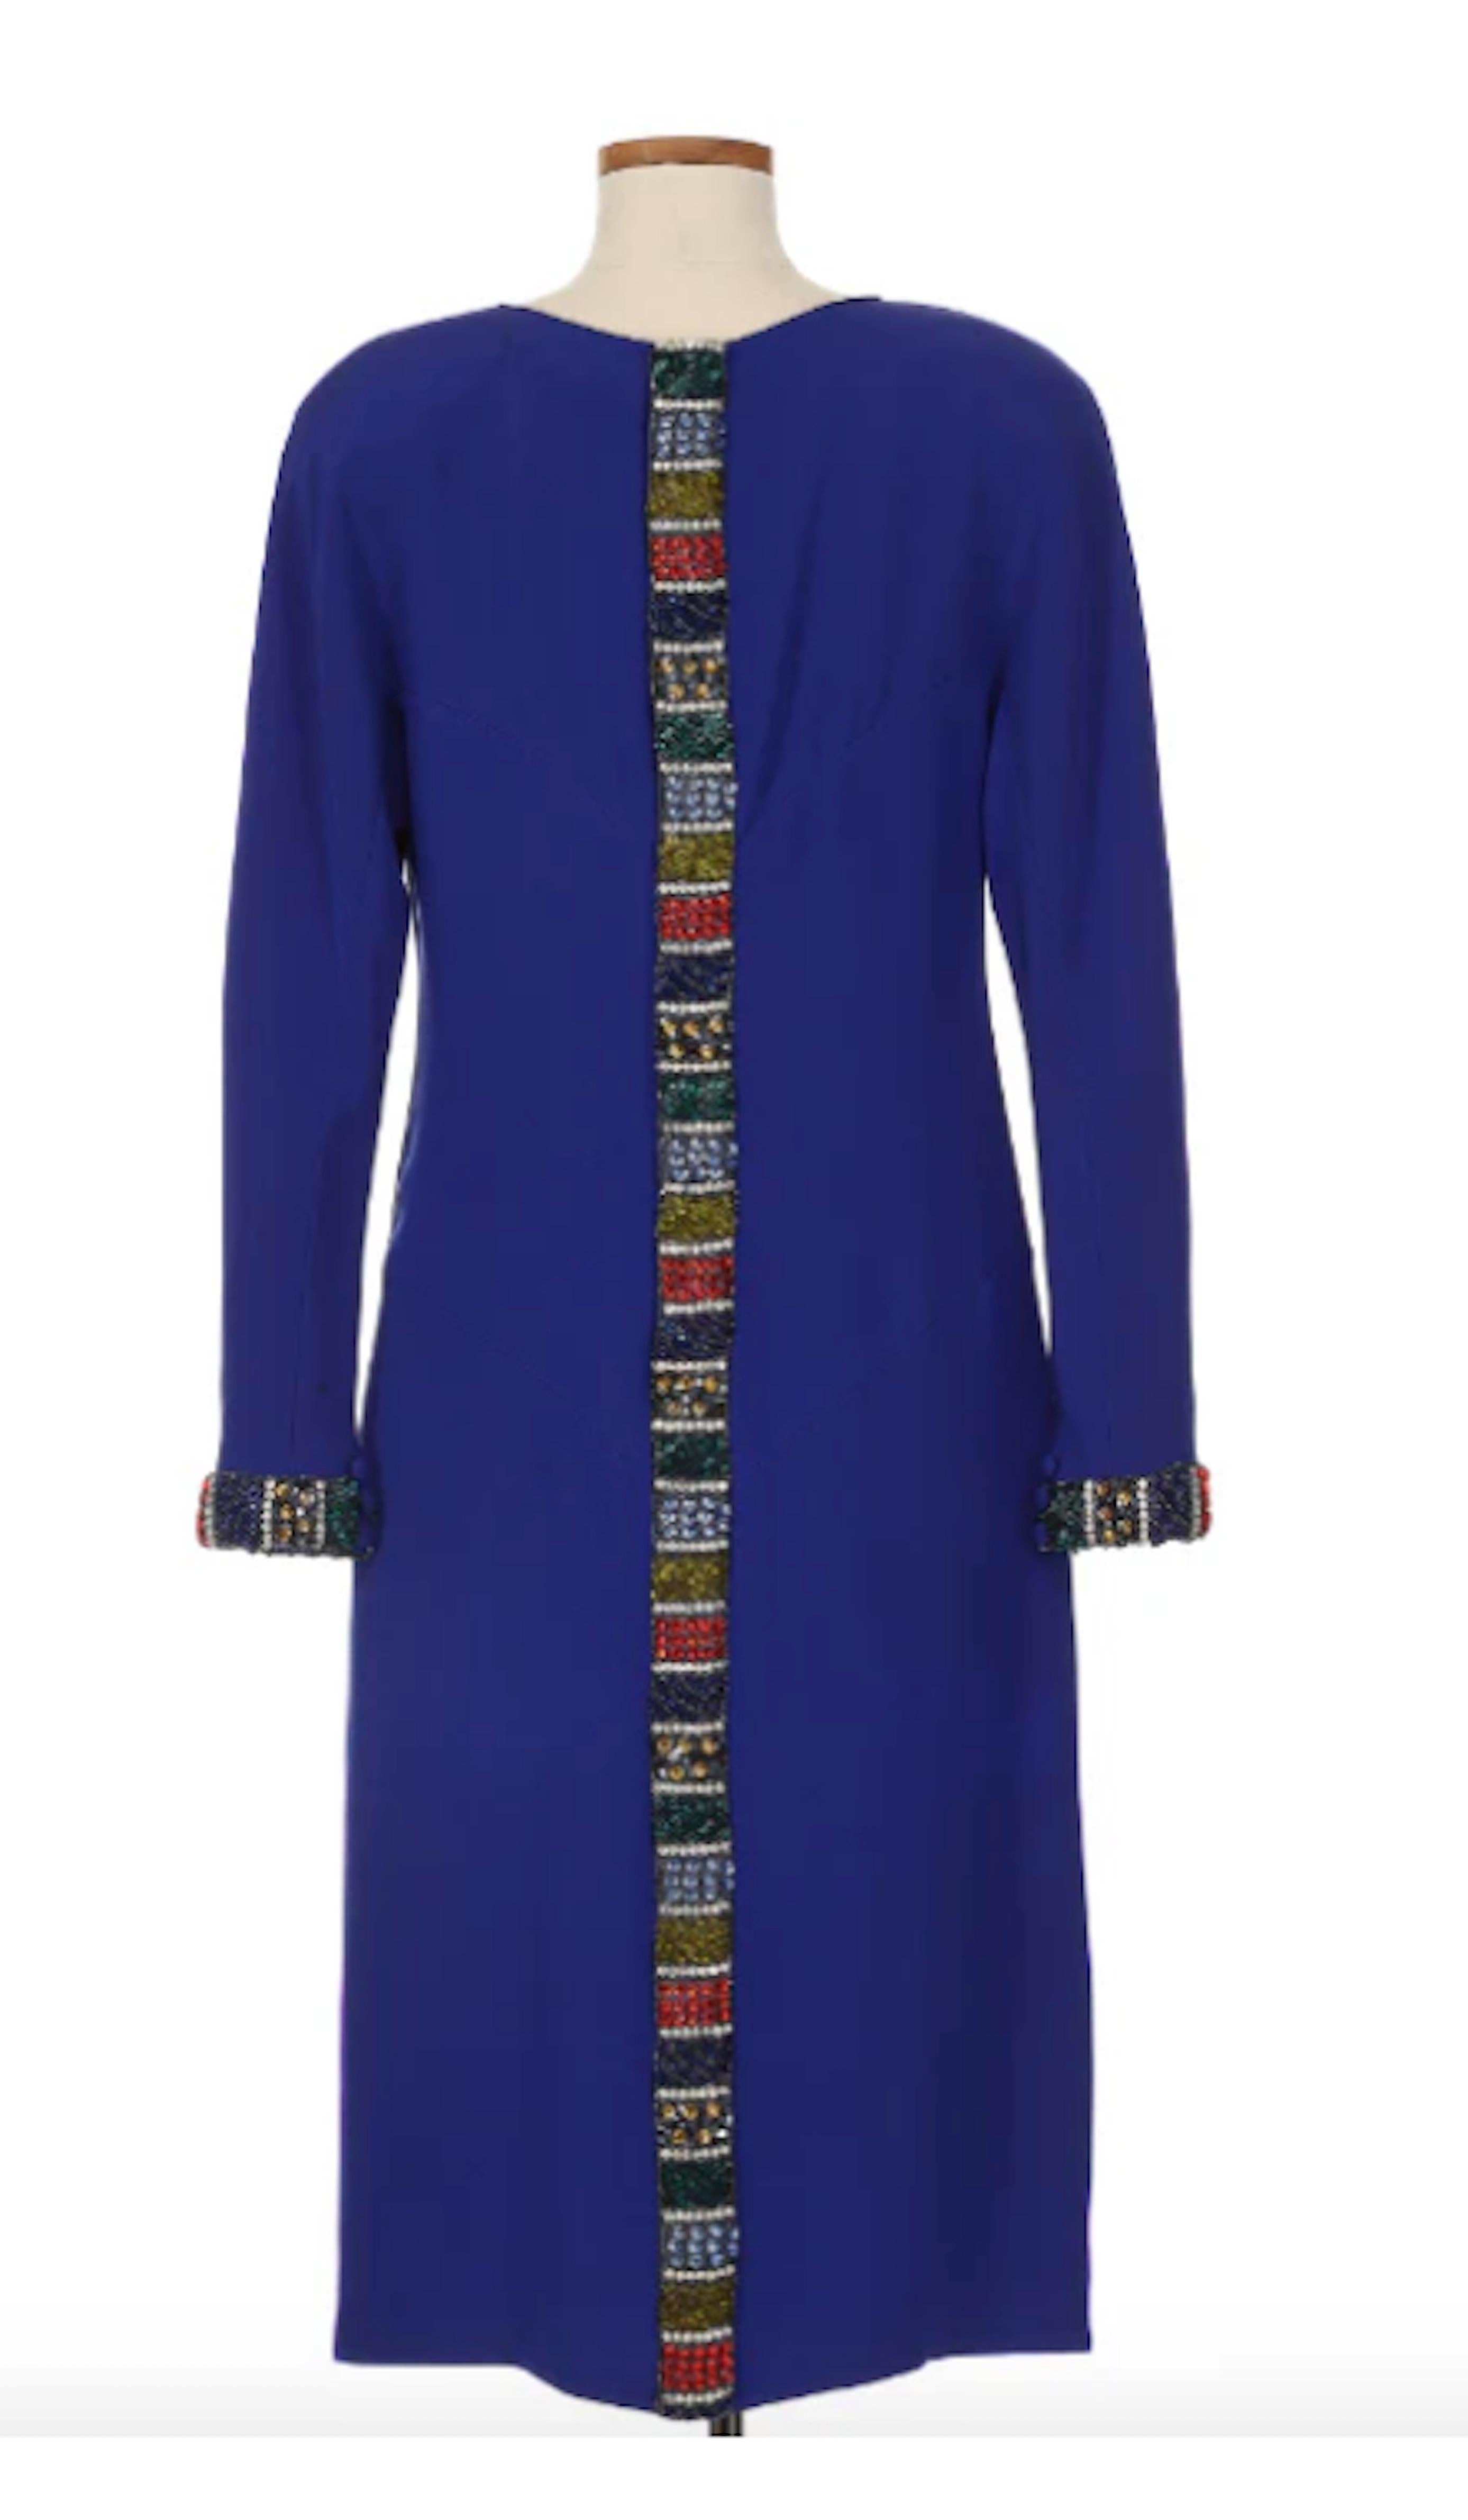 Chloè by Karl Lagerfeld Blue Long Sleeve Dress With Multi Color Sequin. This dress is a sophisticated and elegant piece in a rich blue hue, with multicolor sequin adorned throughout. Throughout Lagerfeld's time at Chloè, his designs never fell short